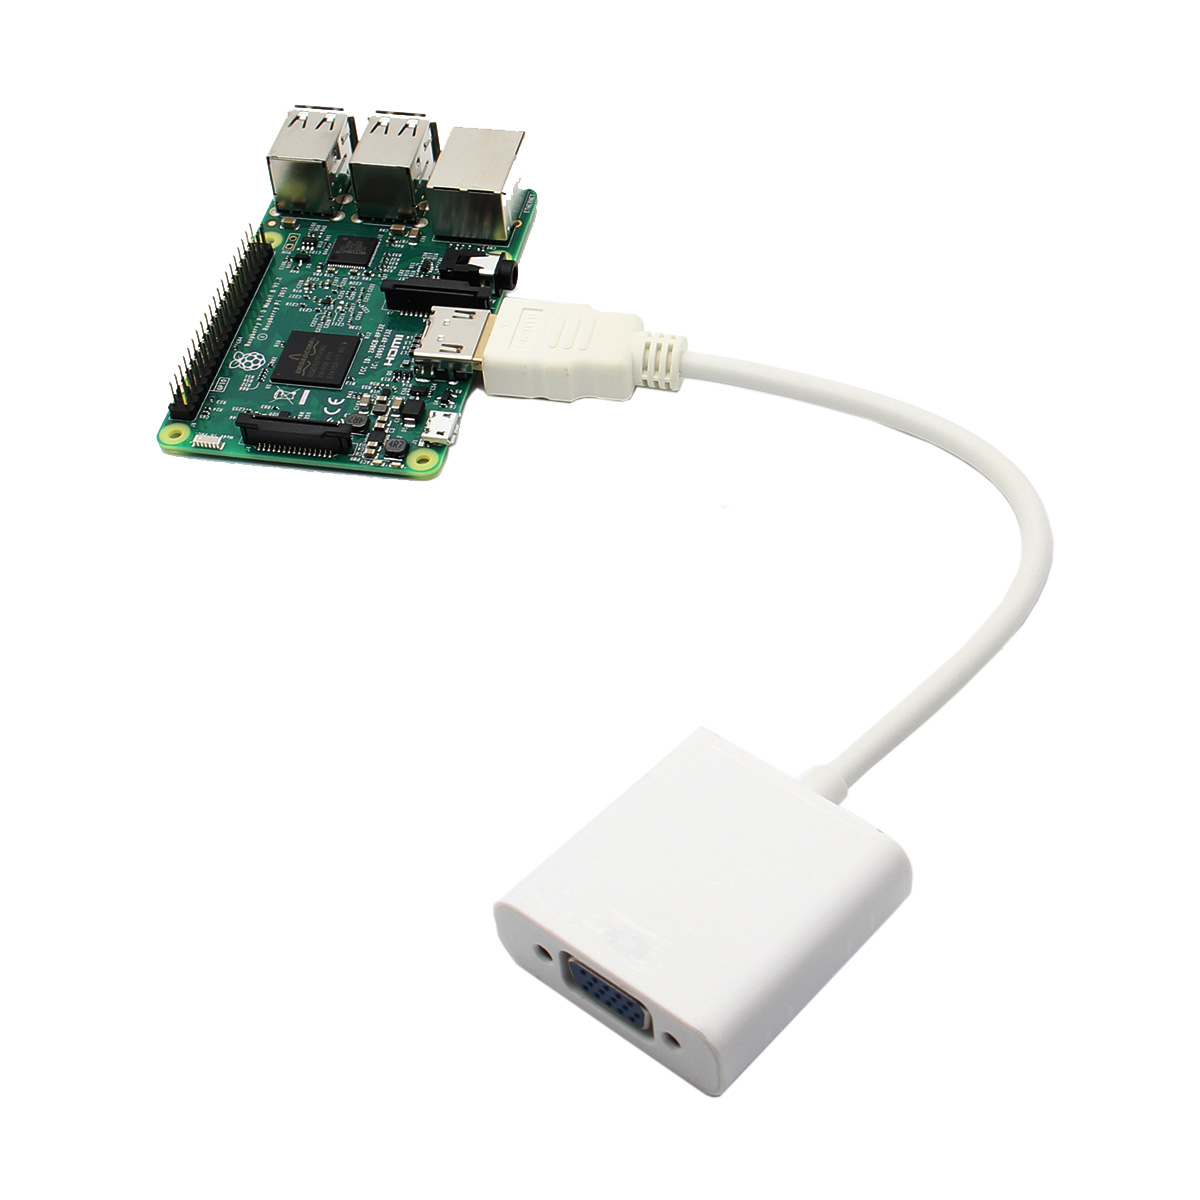 HD-To-VGA-Power-Cable-Adapter-For-Raspberry-Pi-1068692